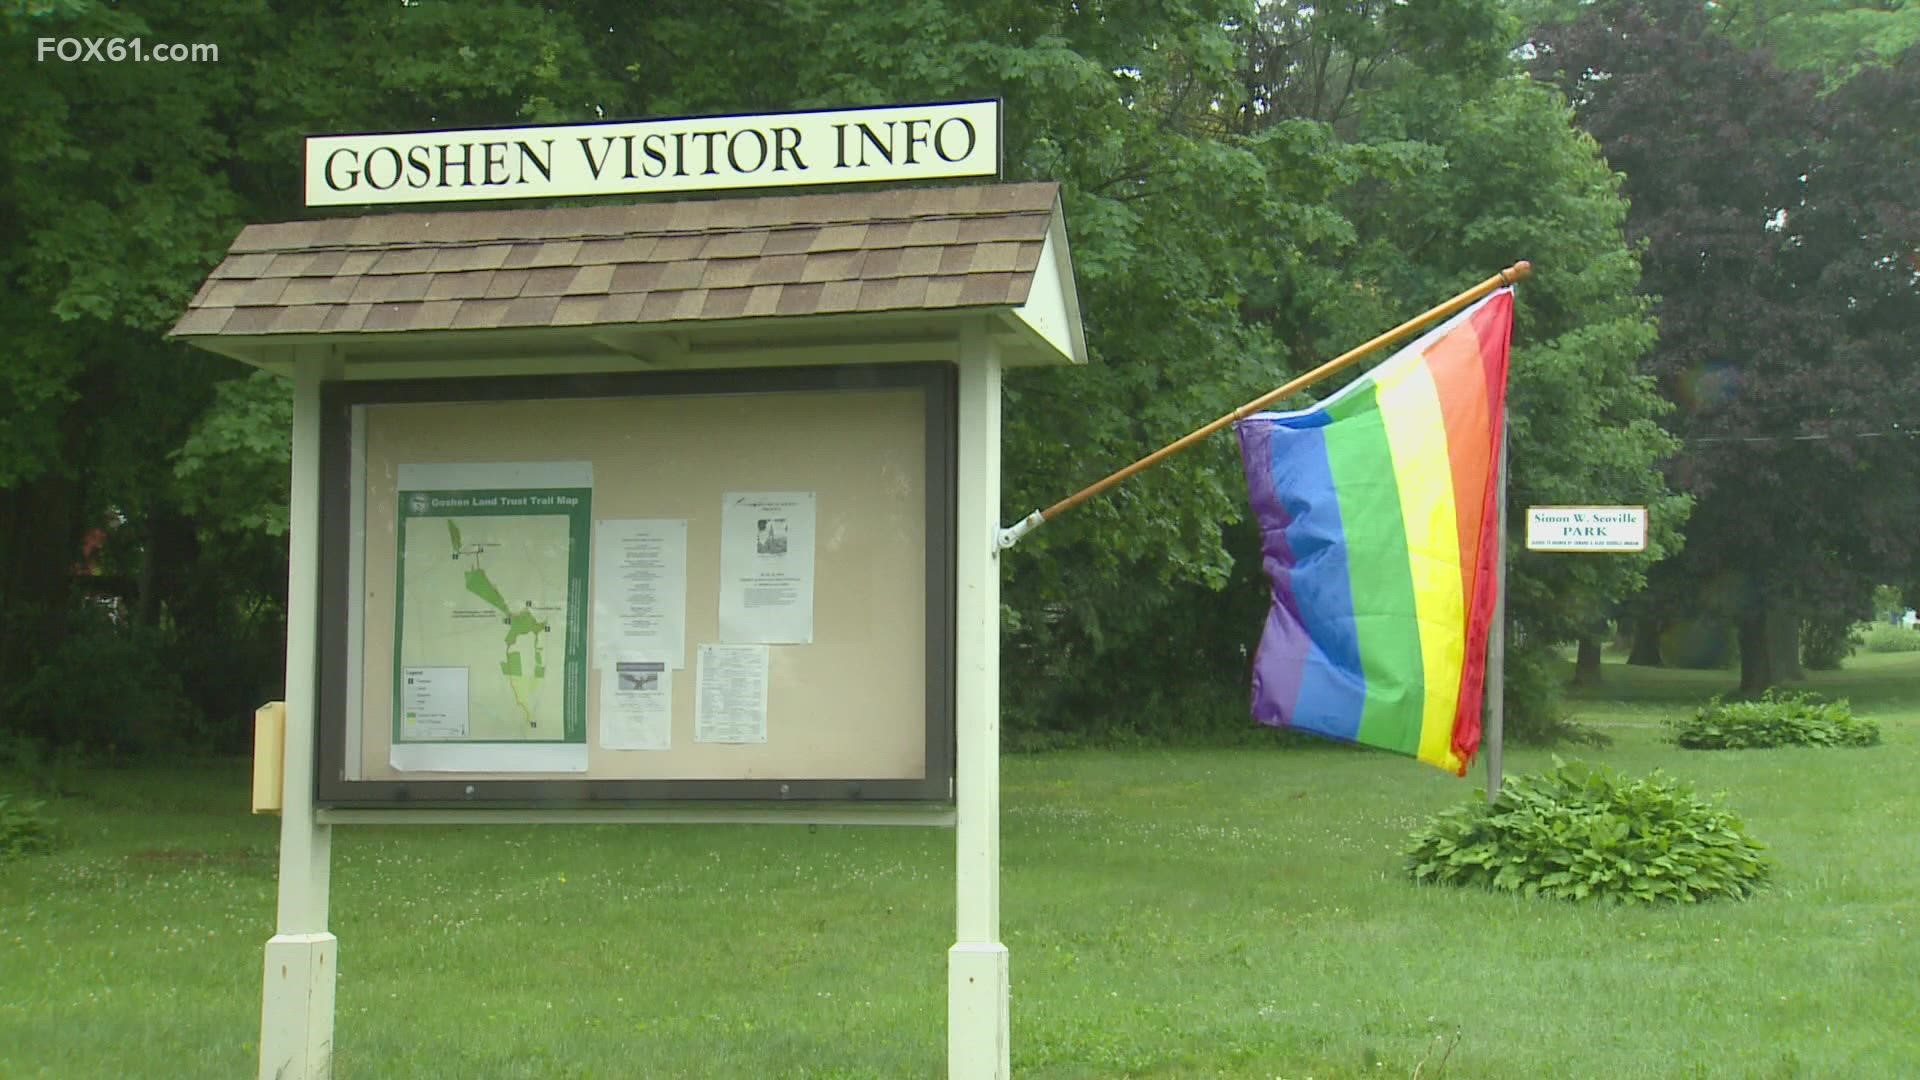 Some Goshen residents have opposed the town putting up a Pride flag on town property.